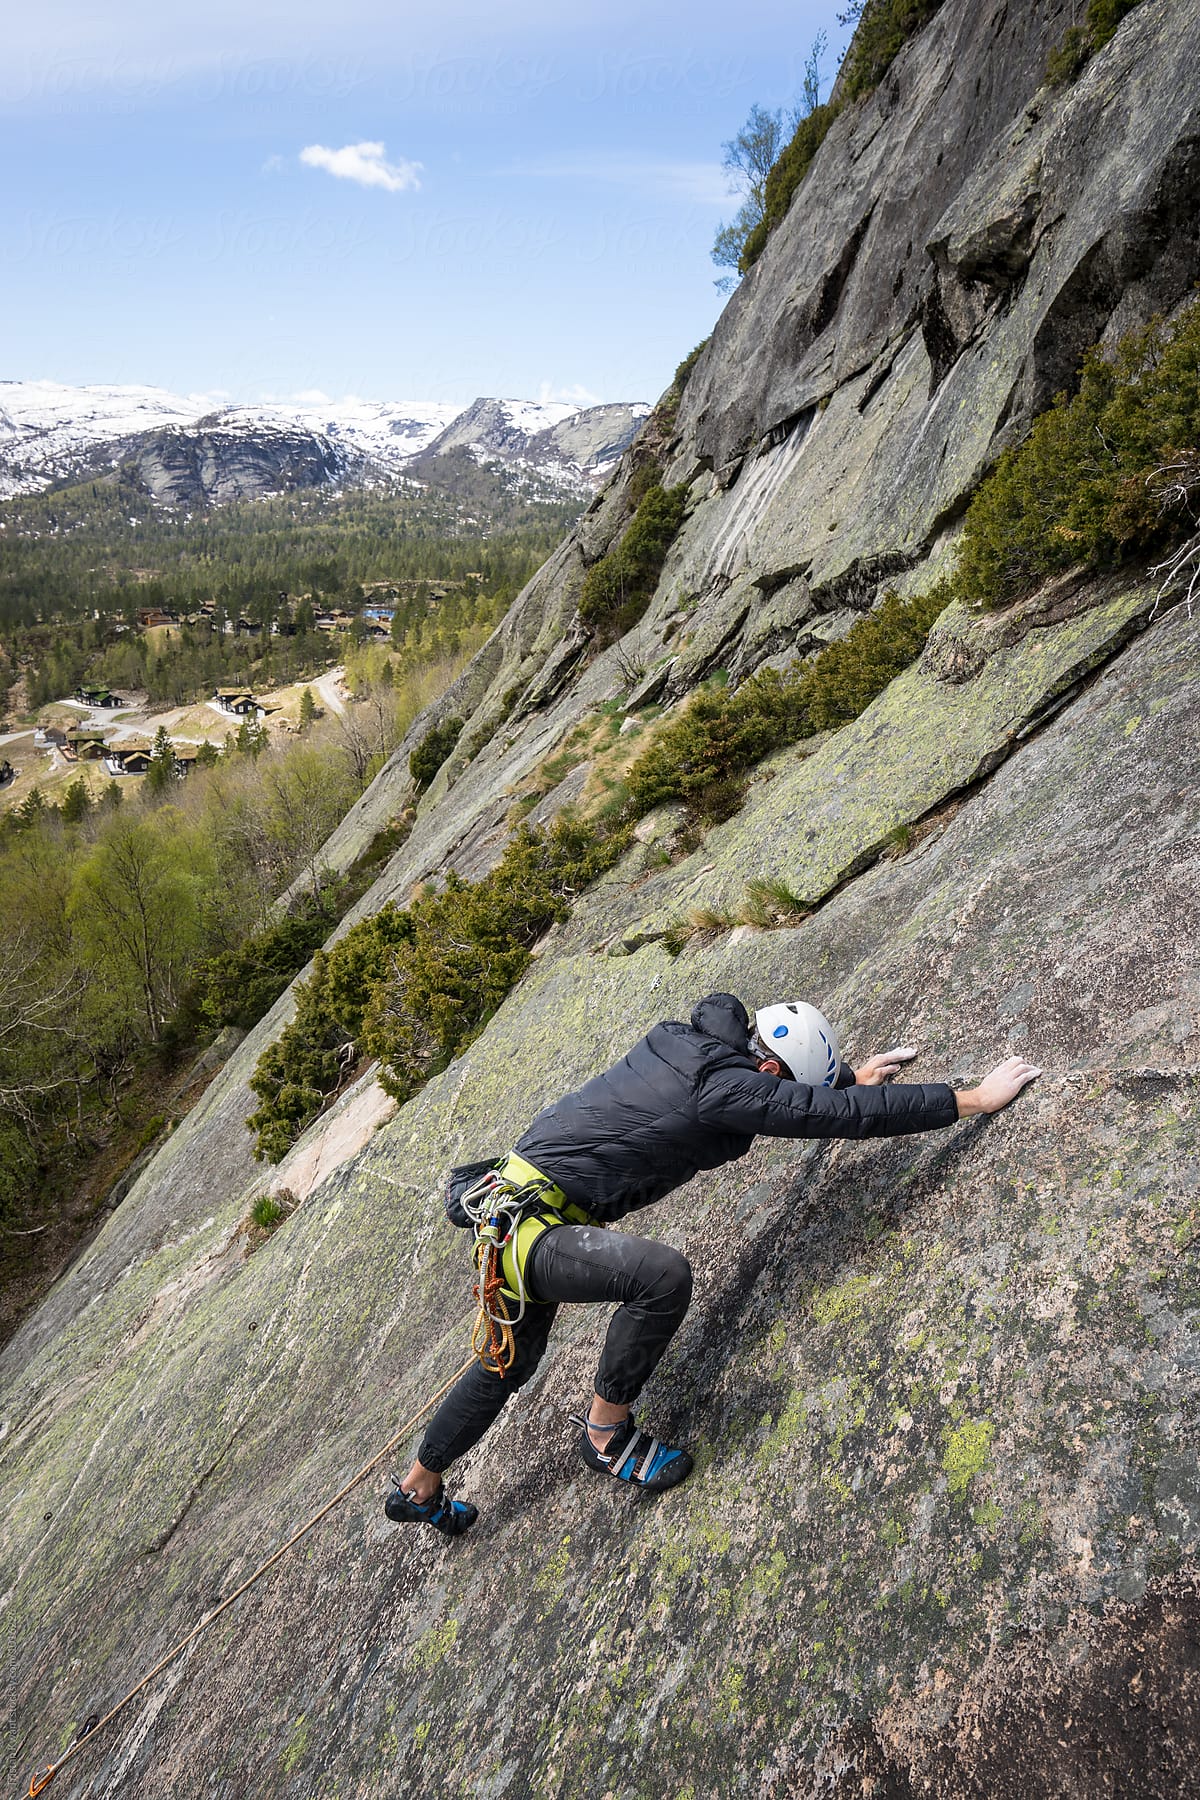 Climbing sport route in setesdal, Norway